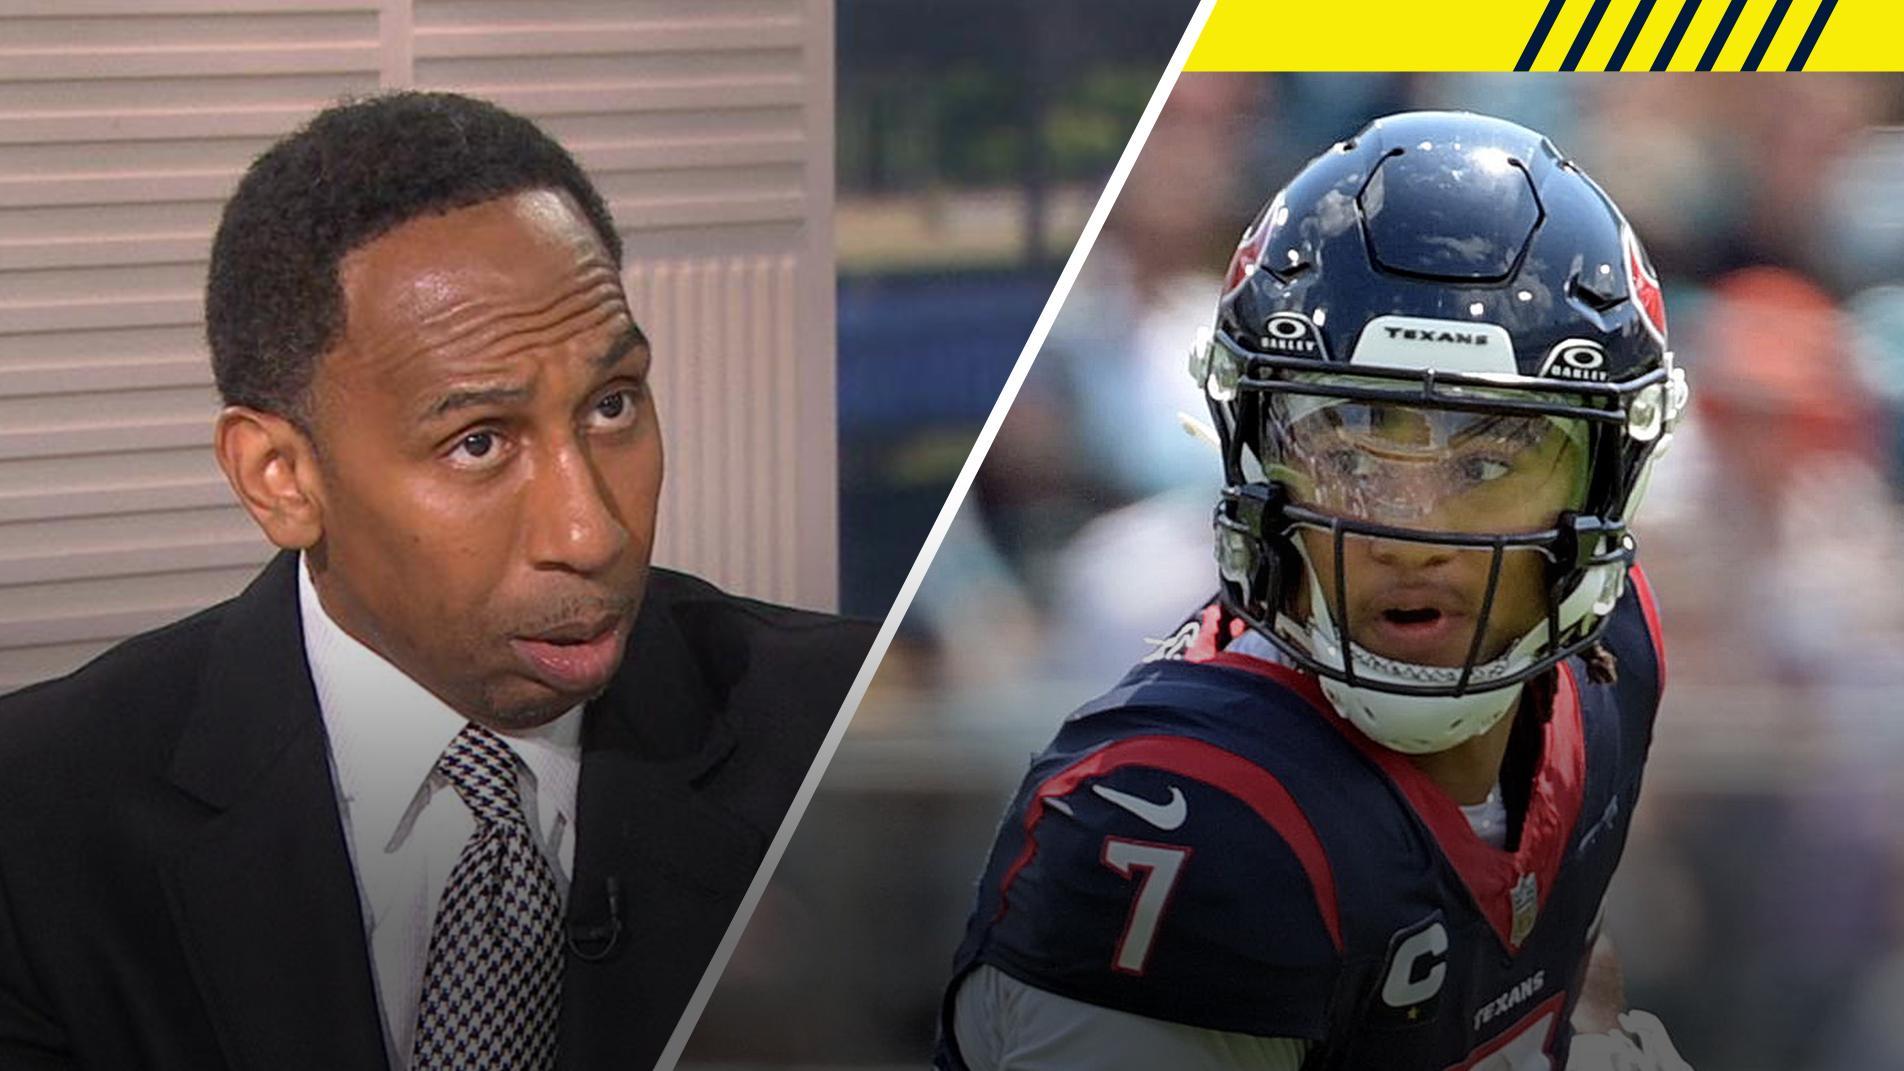 Stephen A. disagrees with Tannenbaum's take on Love over Stroud